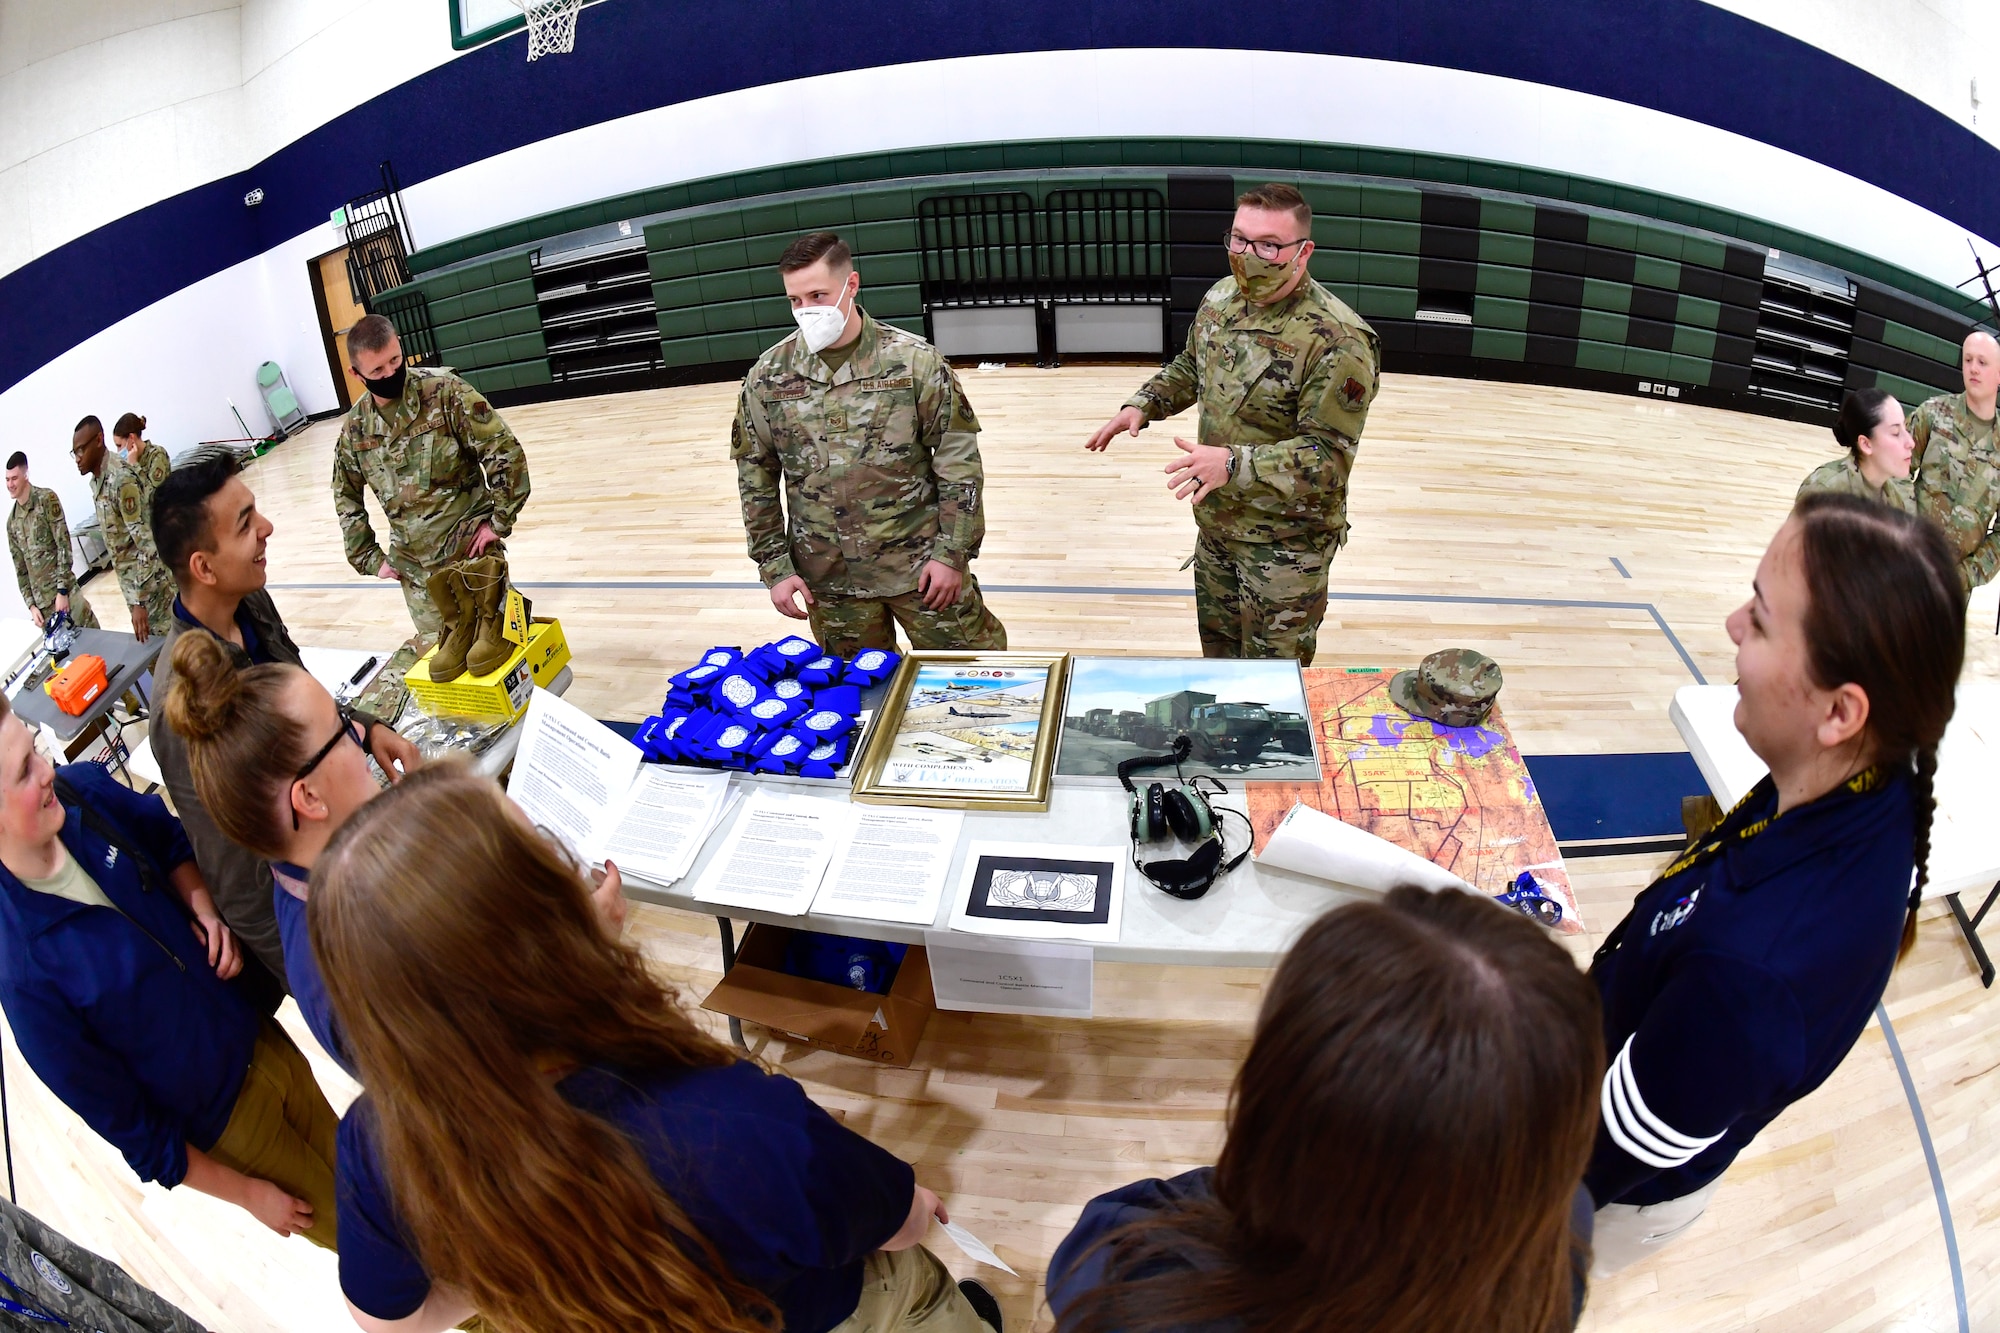 Senior Airman Nicolas Geanta, 729th Air Control Squadron, speaks with students while participating in a job fair at the Utah Military Academy, May 25, 2021, in Riverdale, Utah. Airmen from Hill Air Force Base recently hosted the event at the nearby charter high school to educate and inspire students, as well as promote interest in the possibility of future military careers. (U.S. Air Force photo by Todd Cromar)